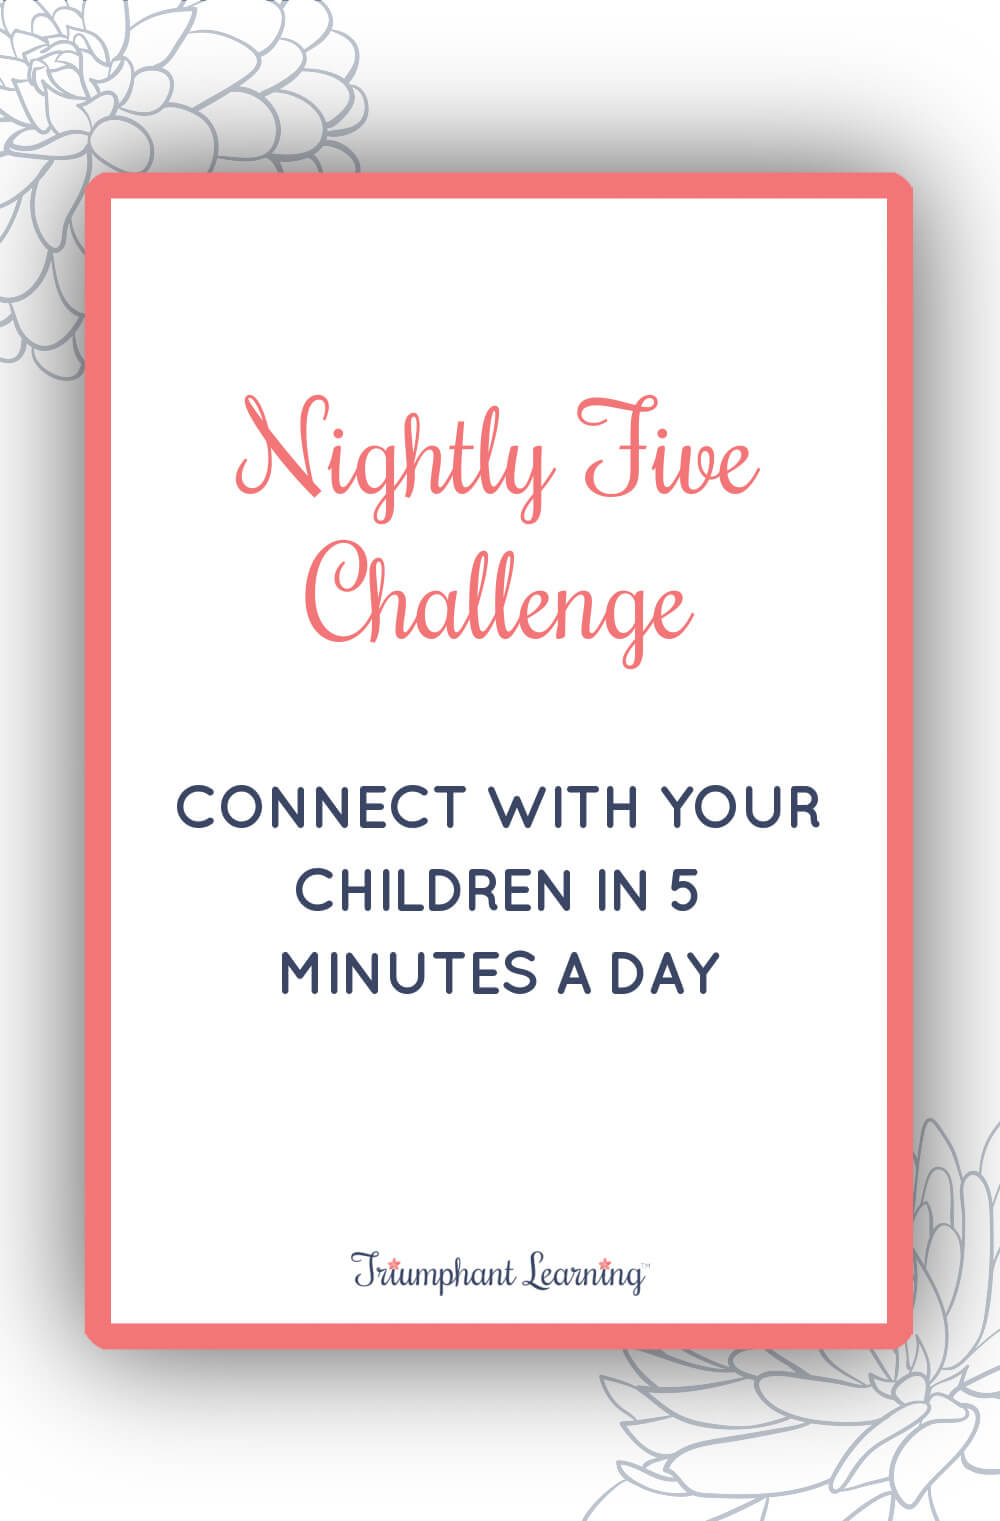 Take the Nightly Five challenge, and connect with your children in five minutes a day by asking them these five questions. You'll hear their heart, earn their trust, and help them process their day. via @TriLearning